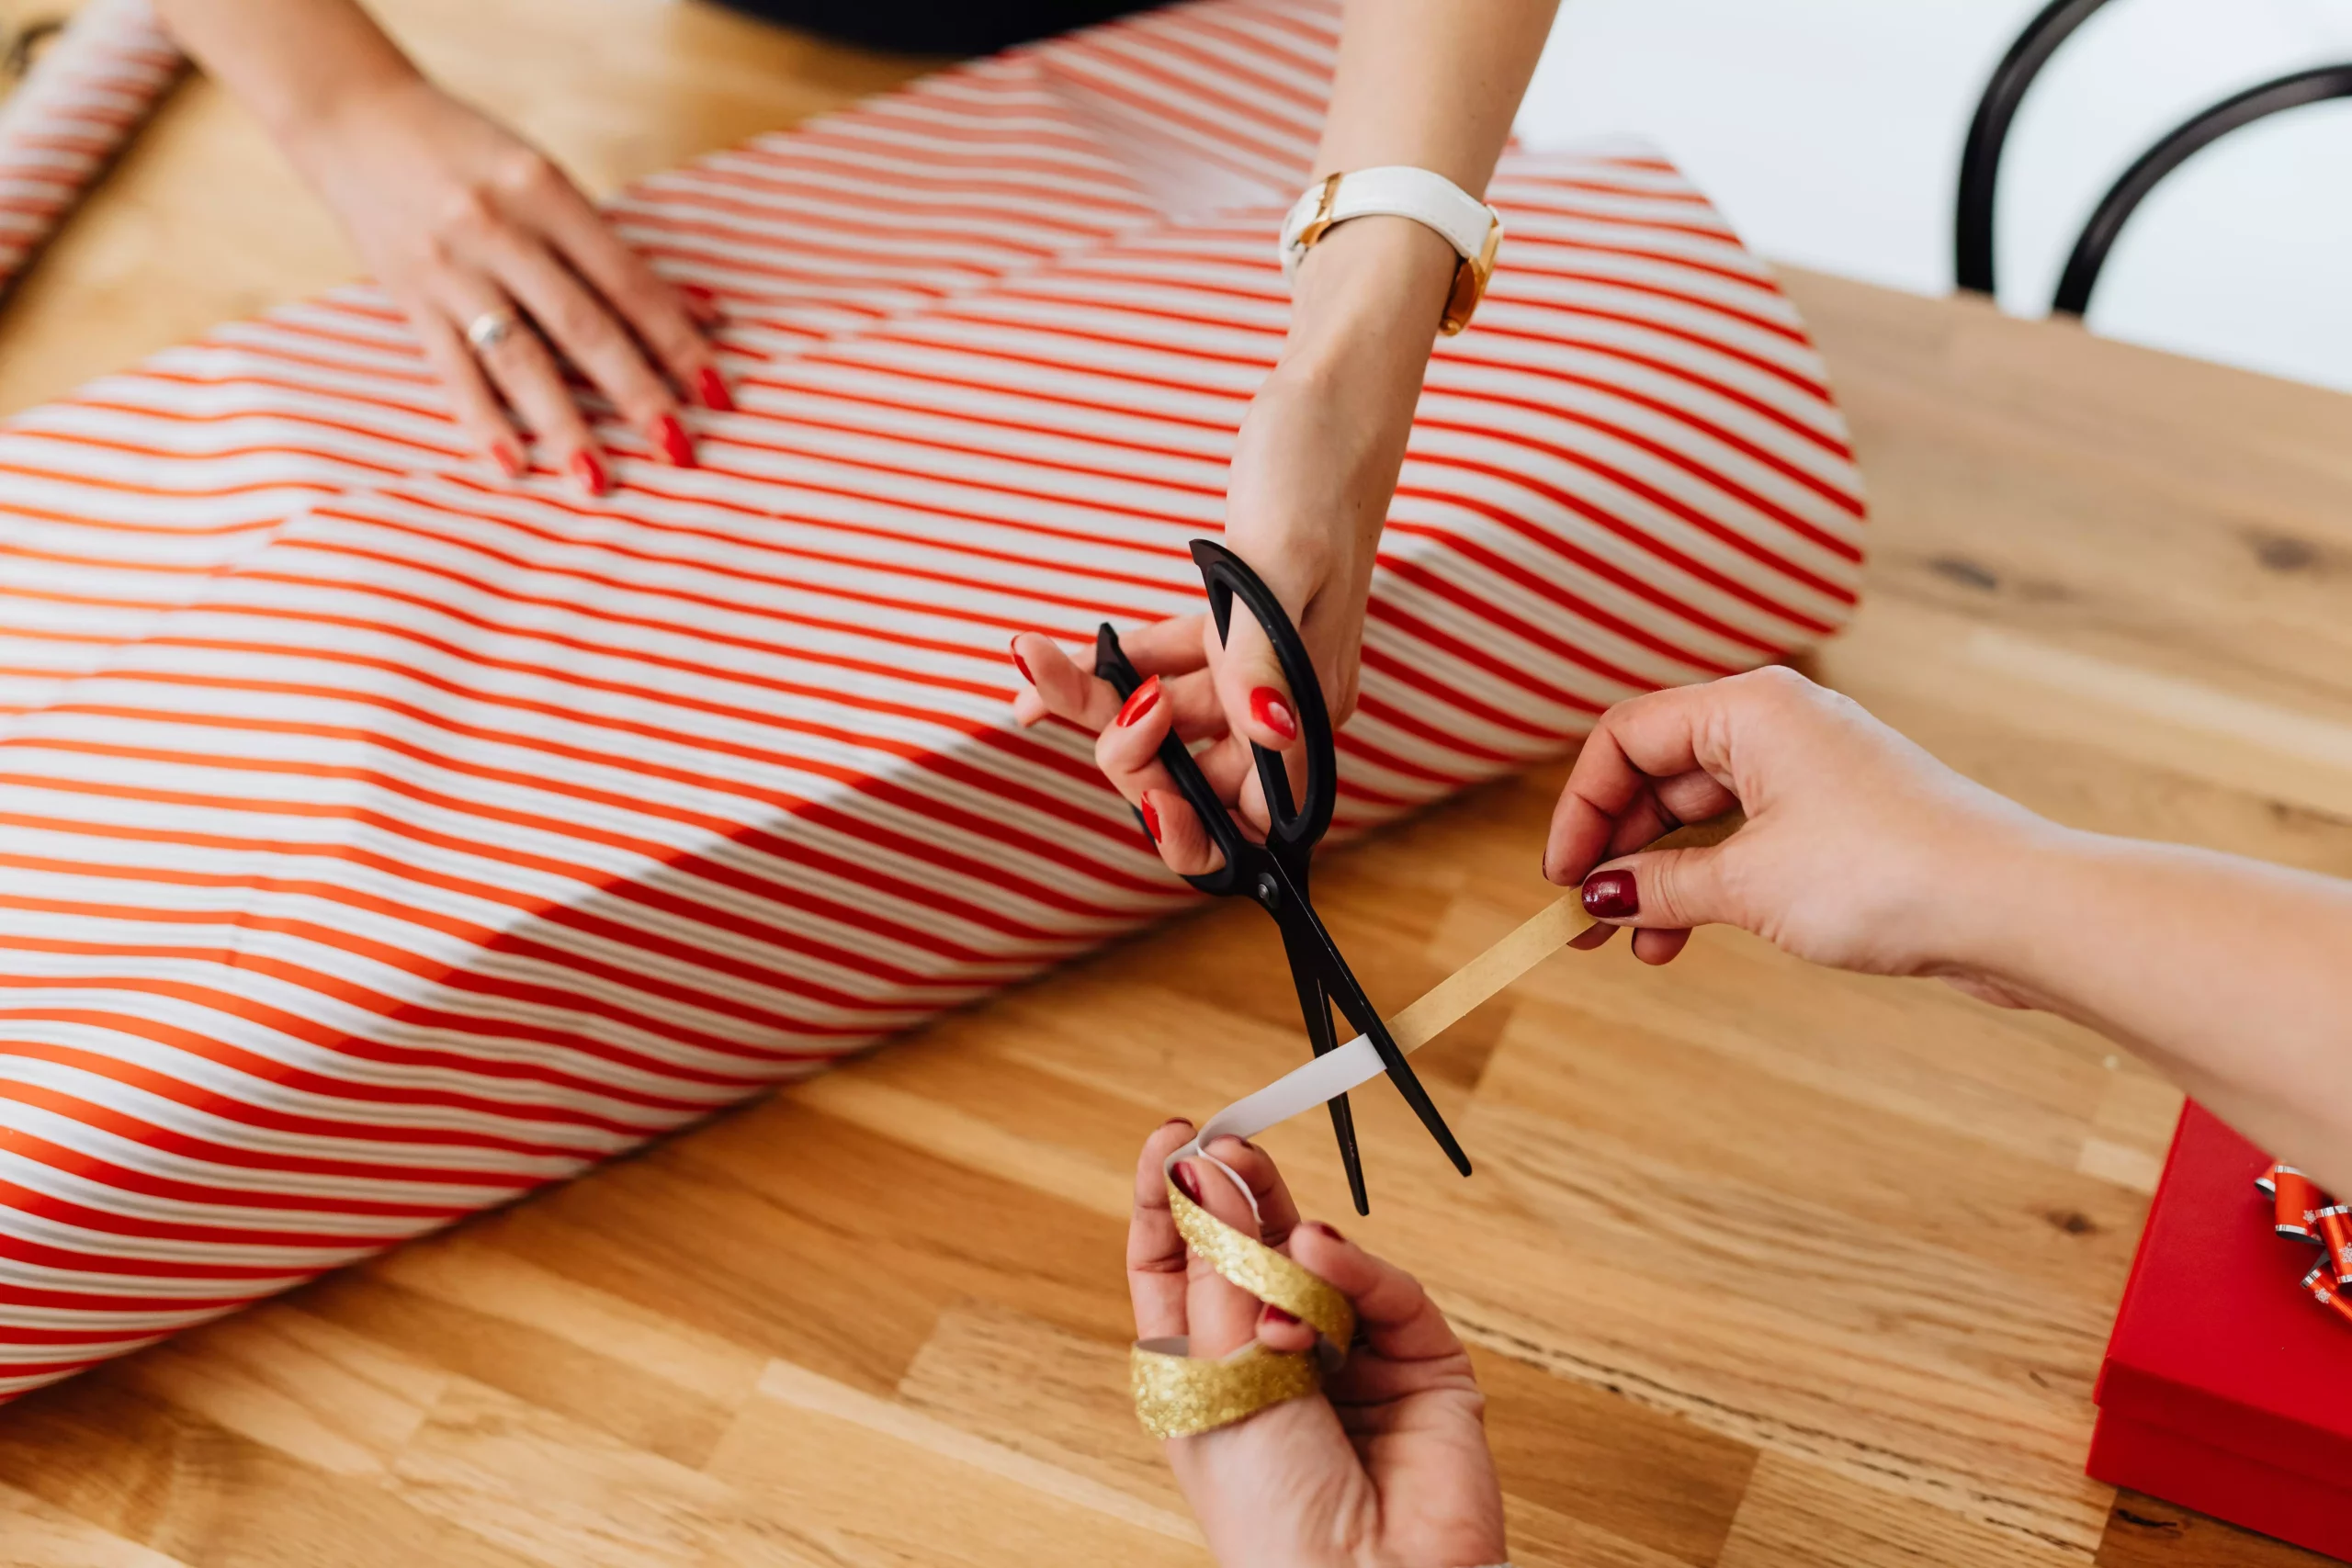 How To Wrap A Blanket As A Gift